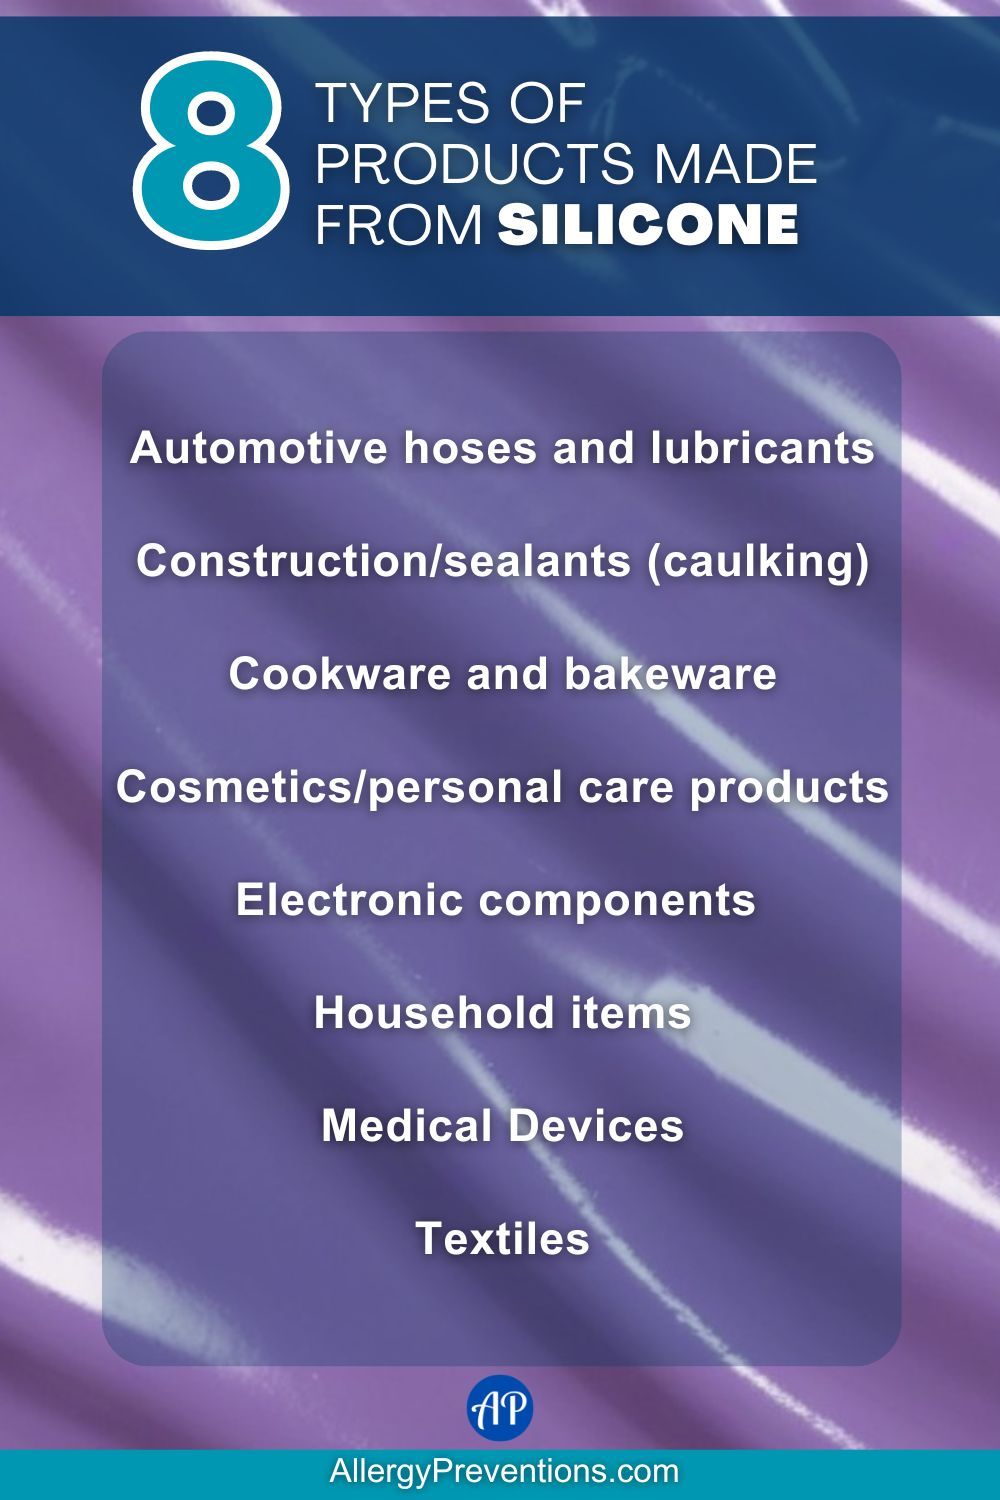 Types of products made from silicone infographic. Common types of products made from silicone are: Automotive hoses and lubricants, Construction/sealants (caulking), Cookware and bakeware, Cosmetics/personal care products, Electronic components , Household items, Medical Devices, and Textiles.